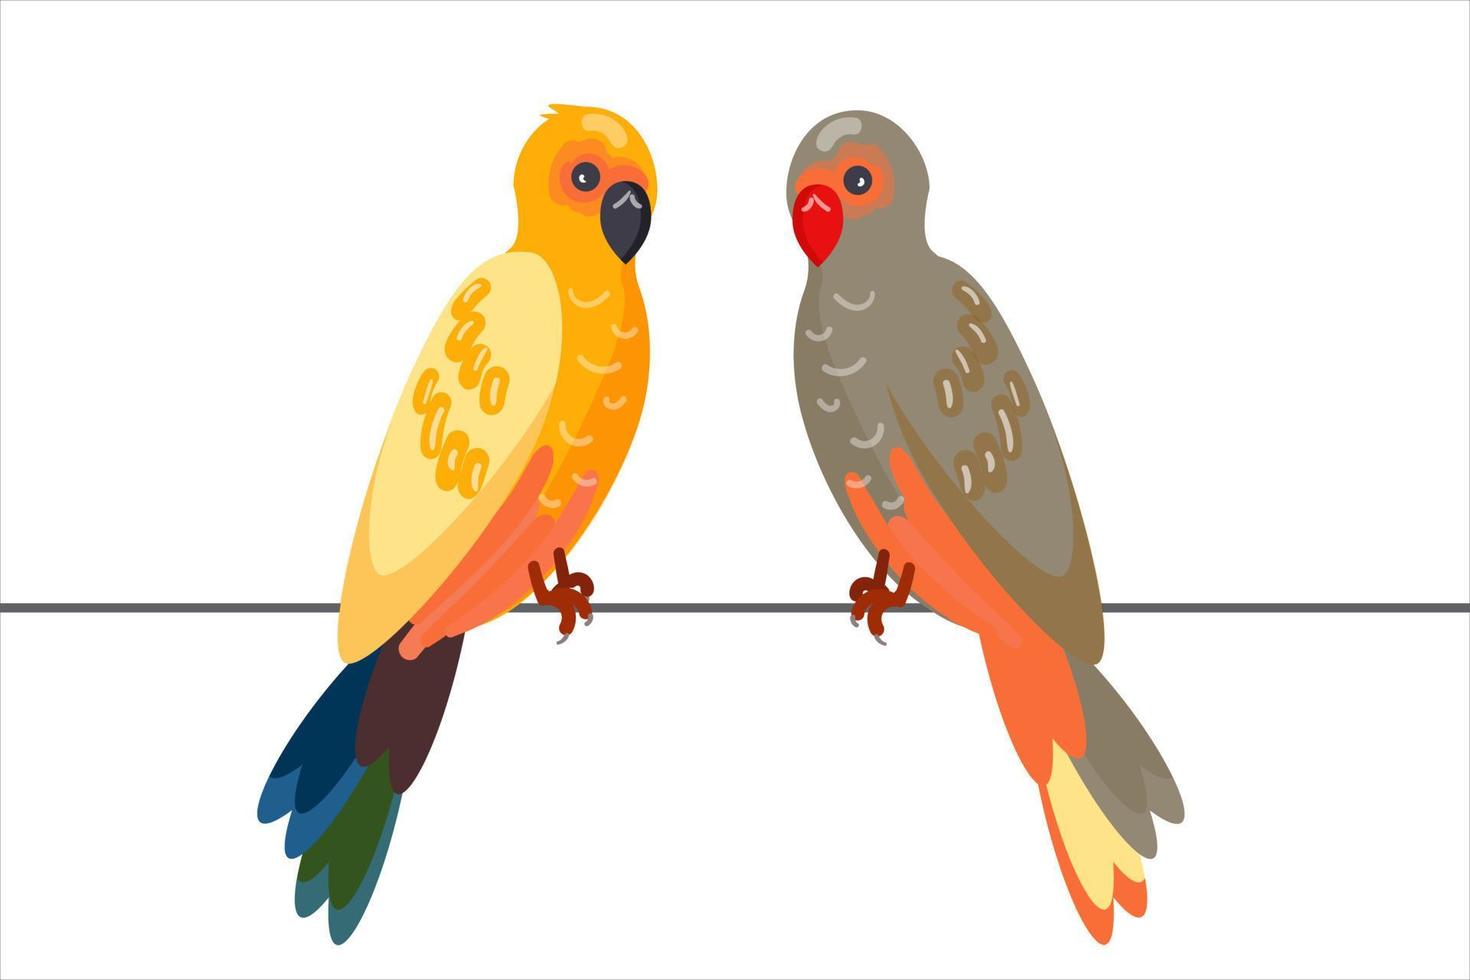 Beautiful parrots sit on the wire. Birds on a wire. Isolated illustration on a white background. Cartoon style. Vector illustration.